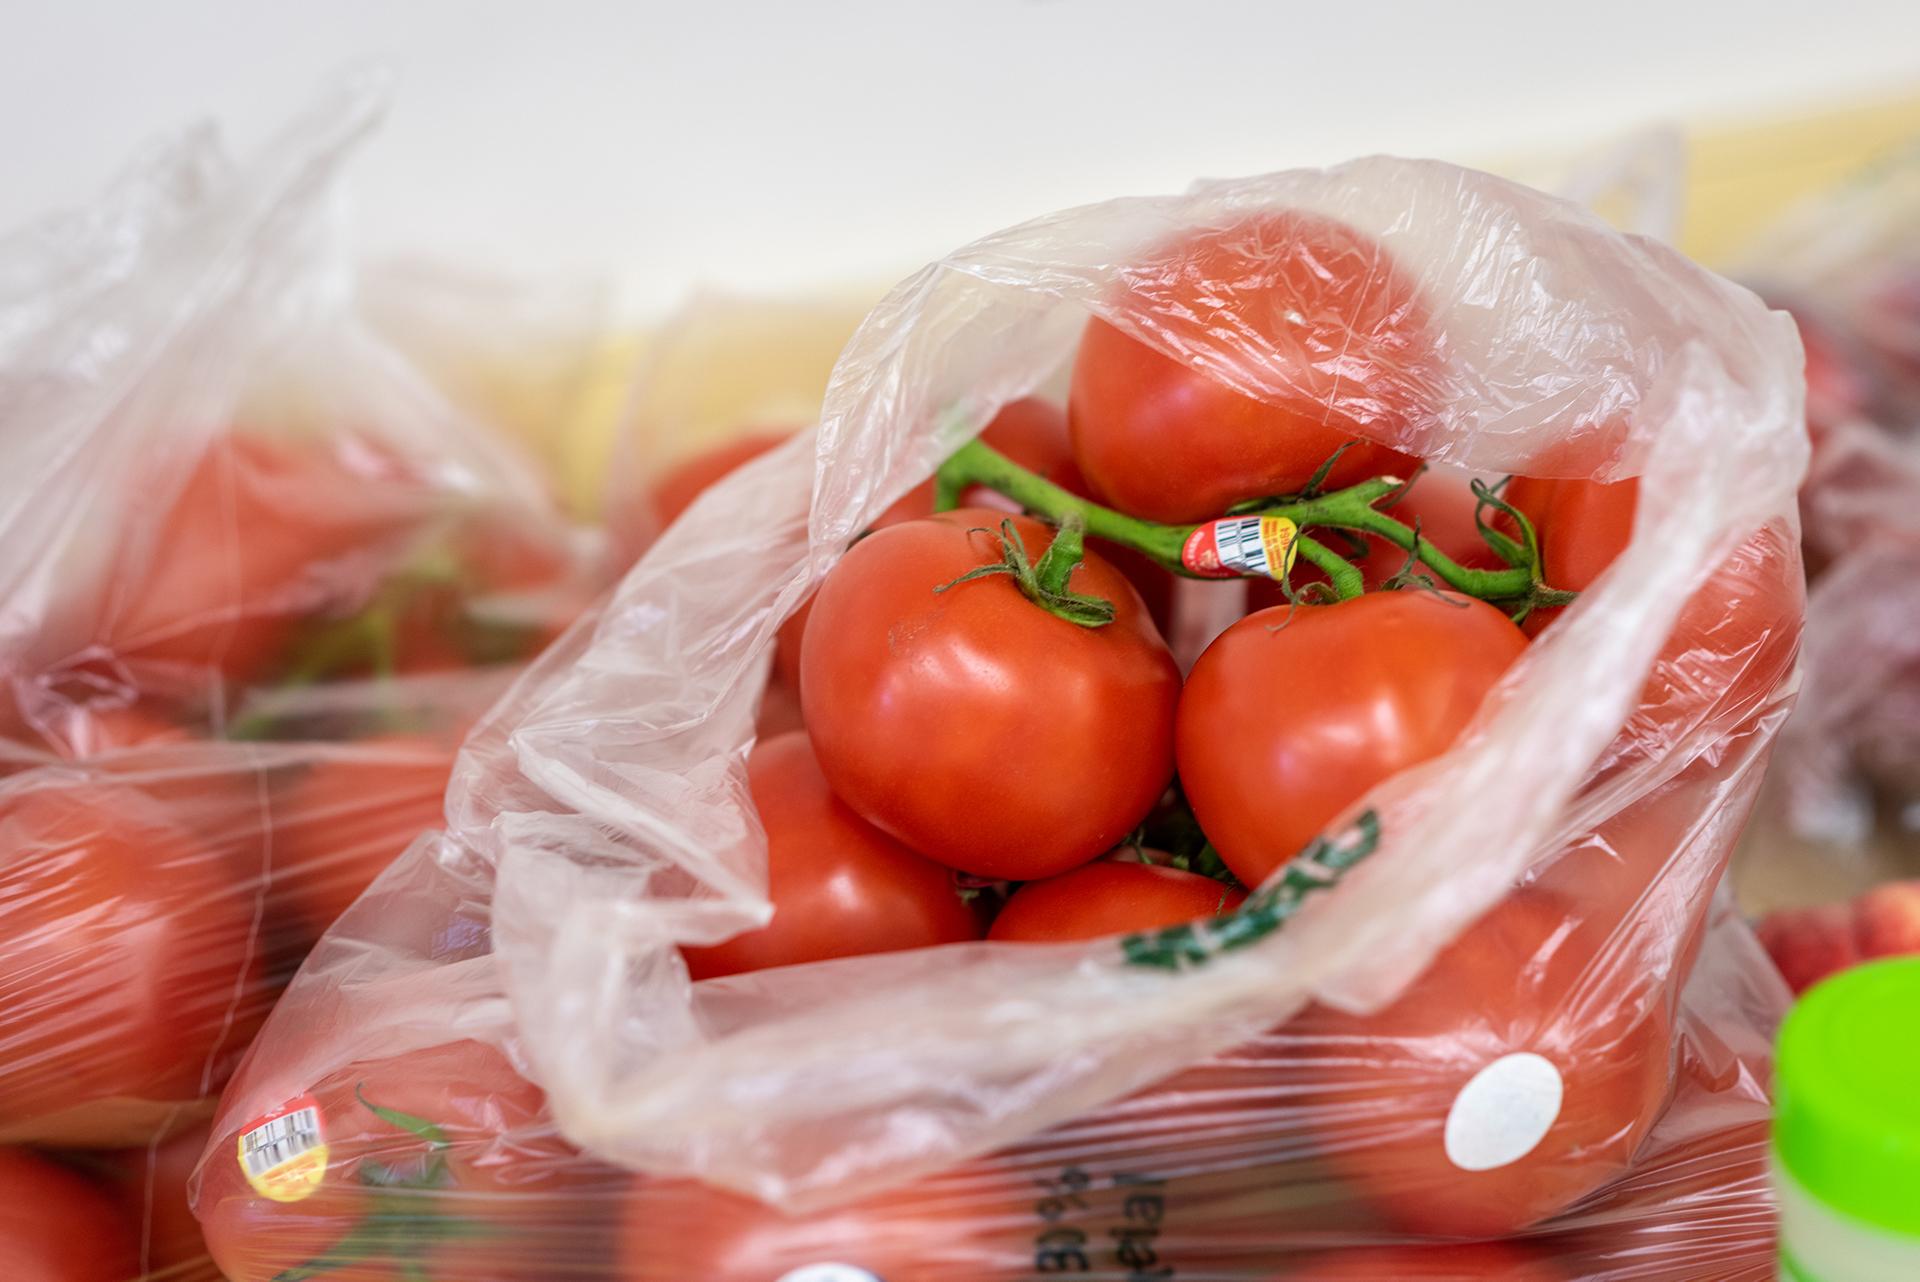 Plastic bags filled with red tomatos